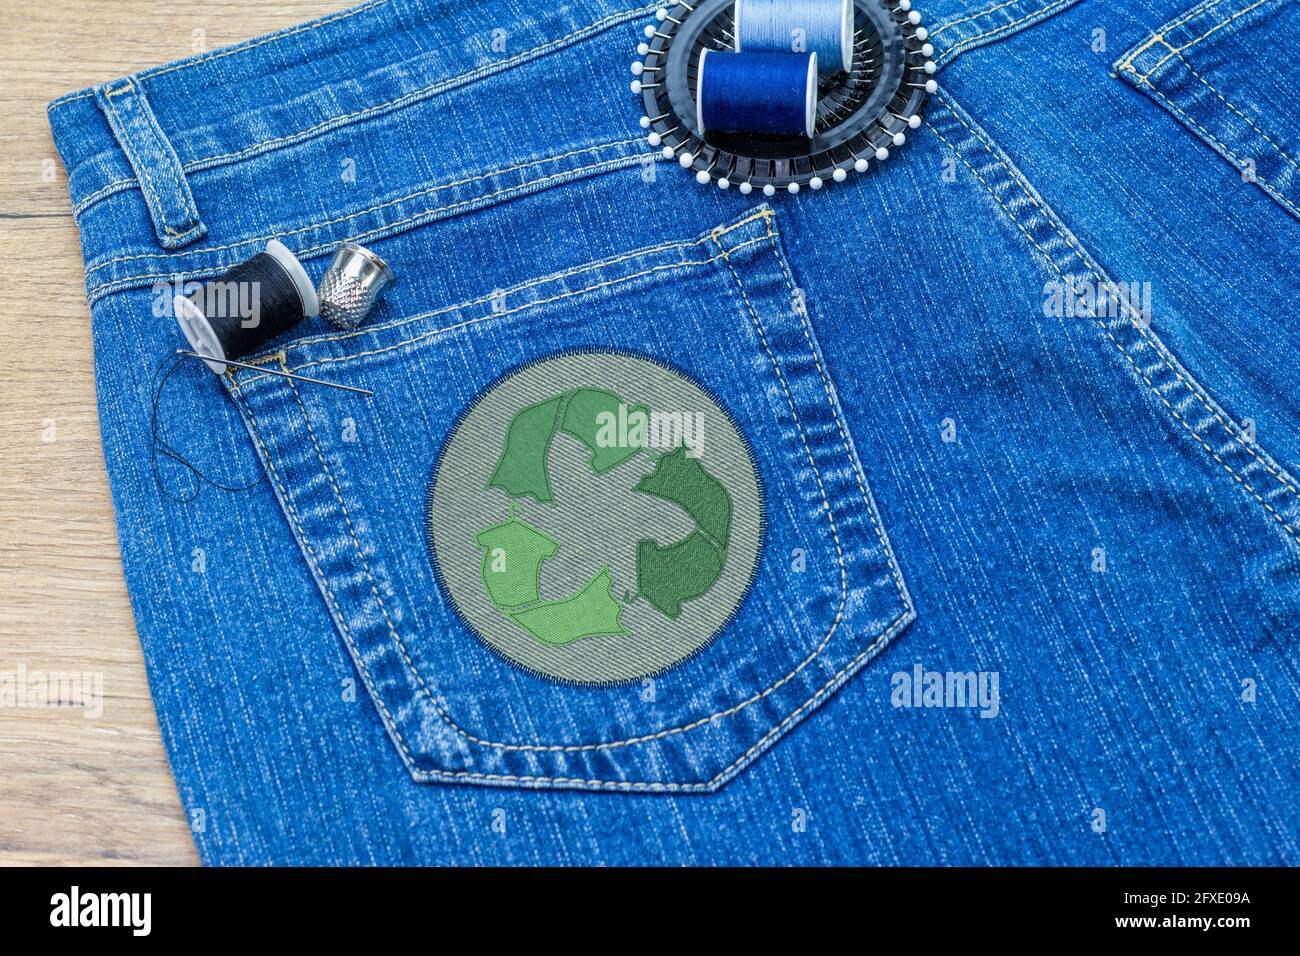 Recycle clothes icon patch on jeans, sustainable fashion visible mending concept, repair, recycle, reuse clothes and textiles to reduce waste Stock Photo